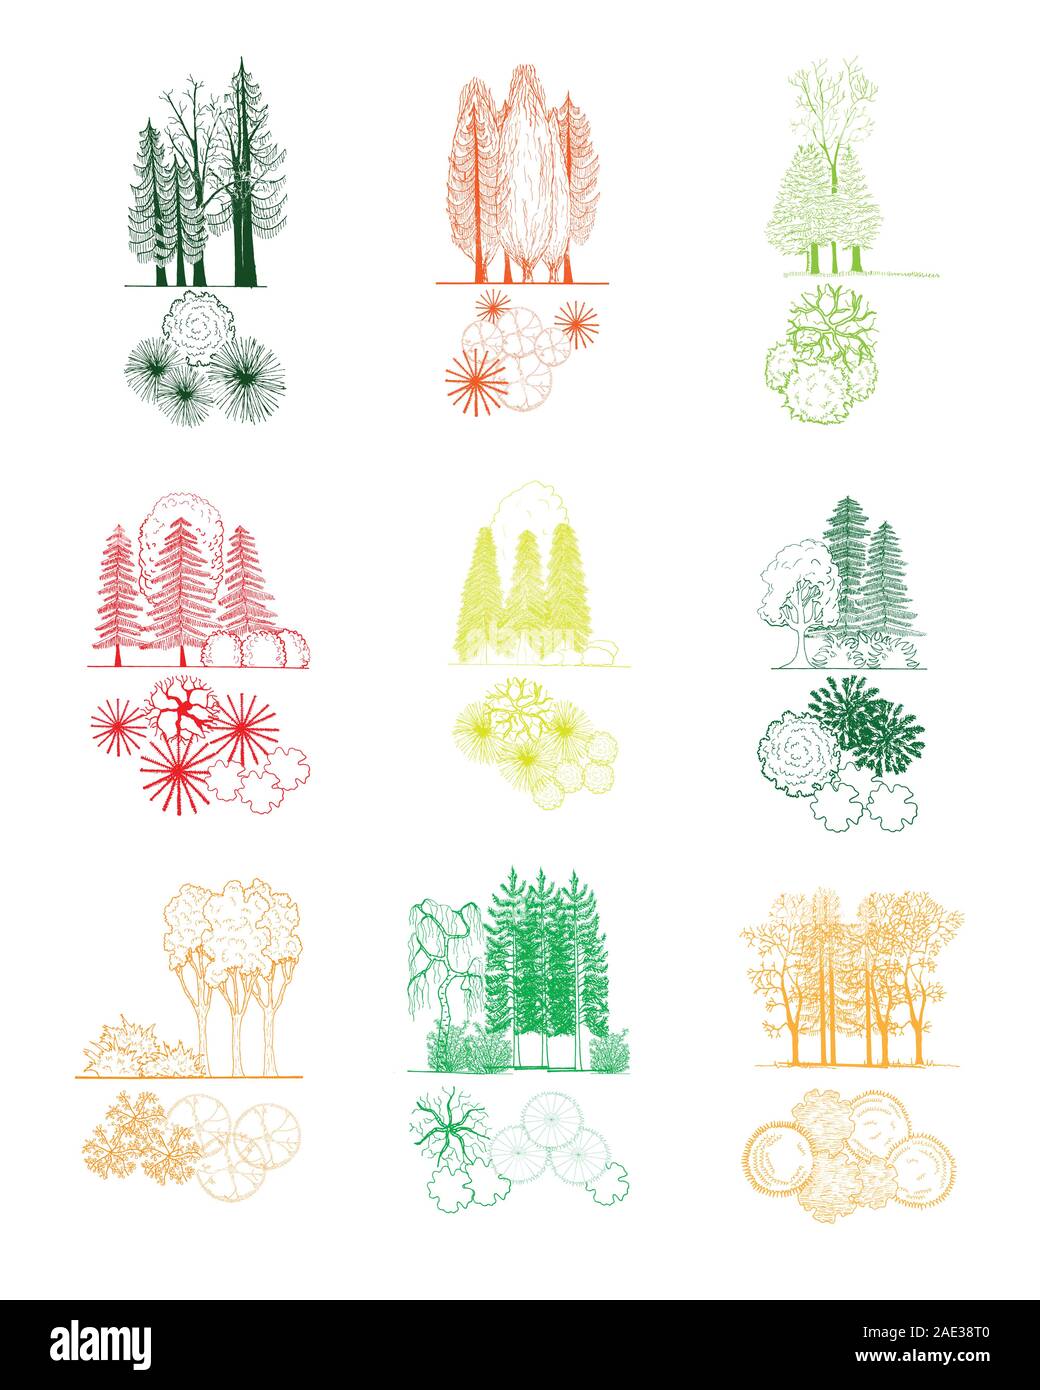 Tree and treetop symbols, vector set for architectural or landscape design Stock Vector